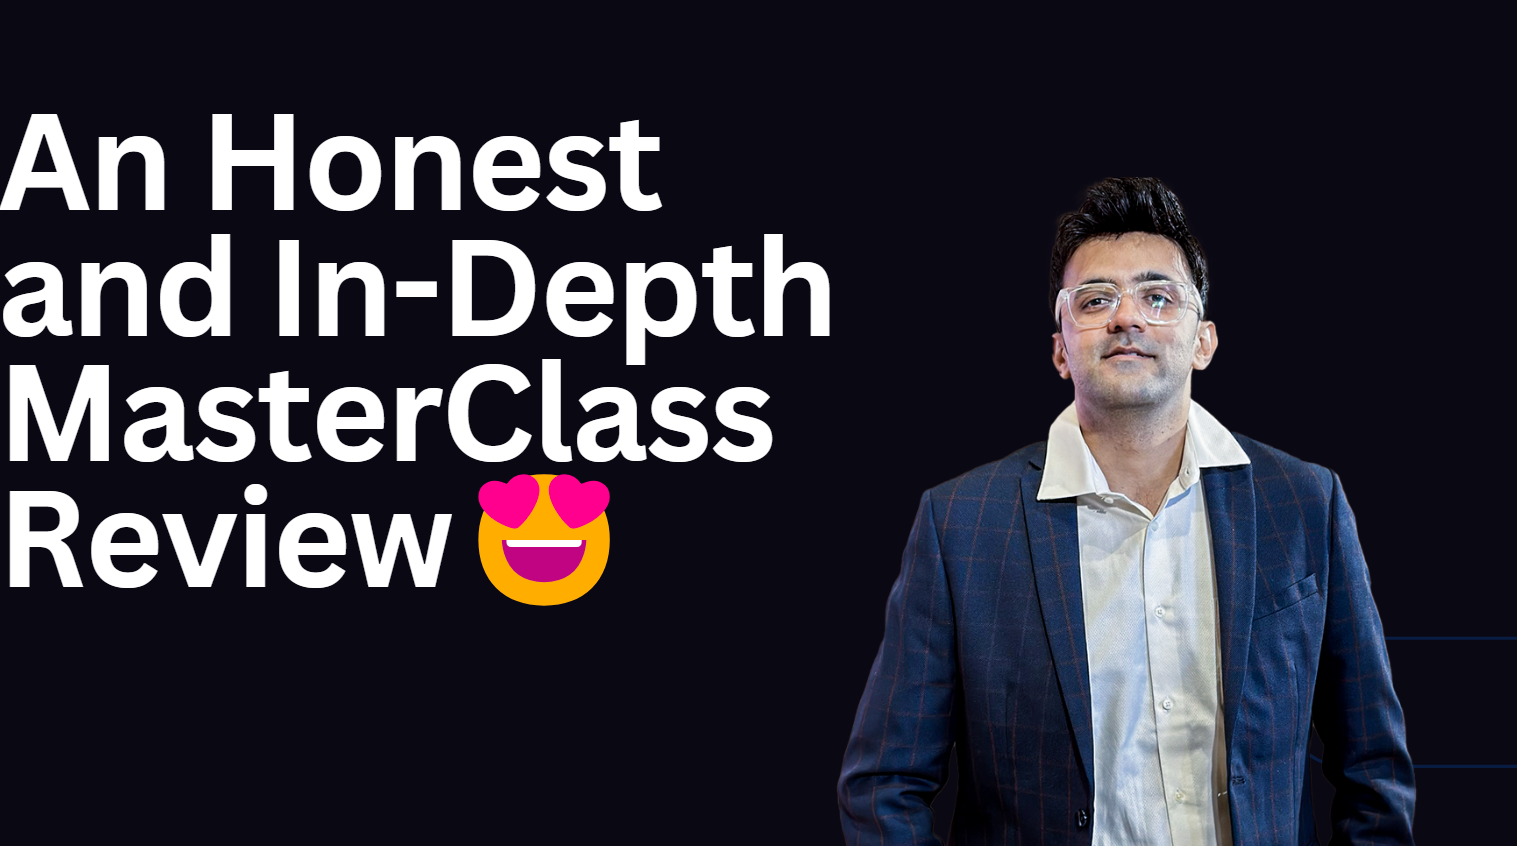 Masterclass Review in detail